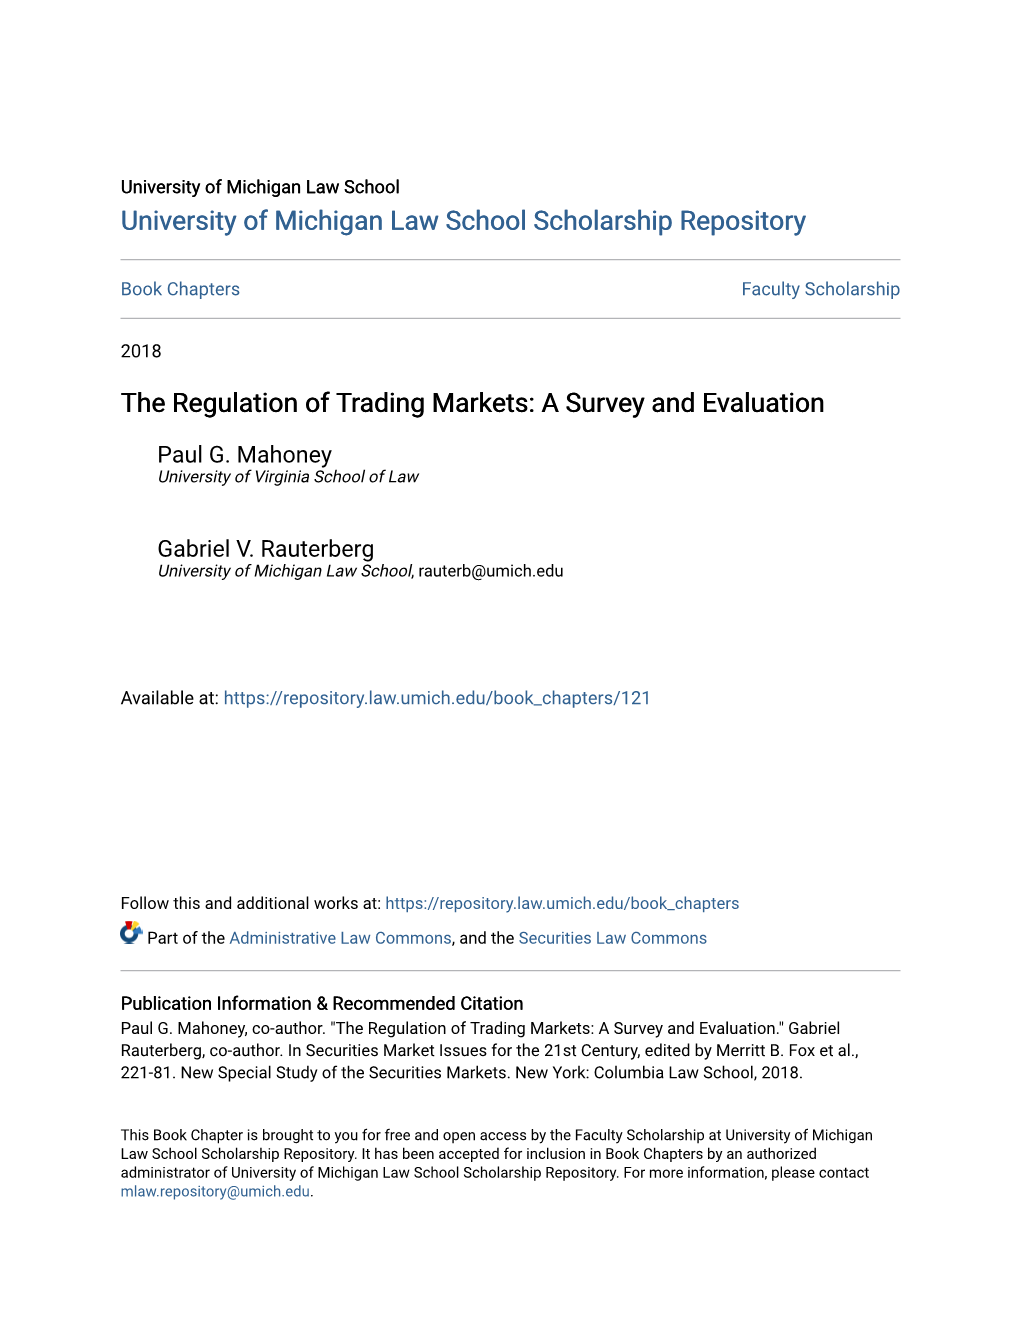 The Regulation of Trading Markets: a Survey and Evaluation